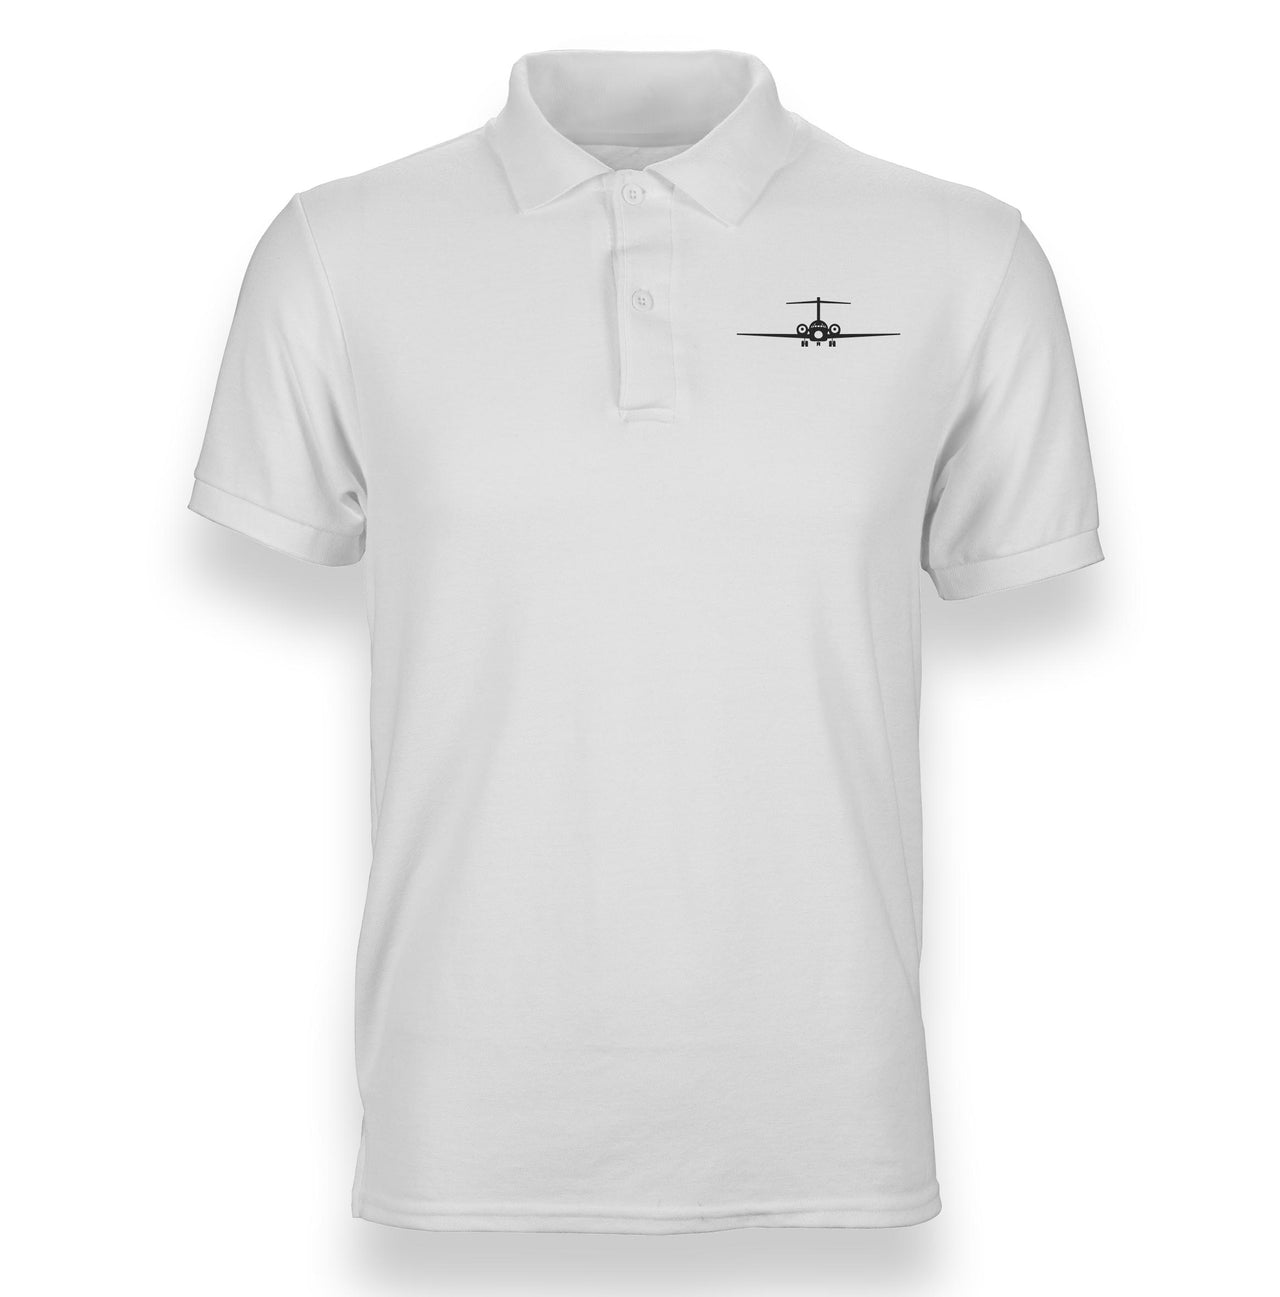 Boeing 717 Silhouette Designed Polo T-Shirts